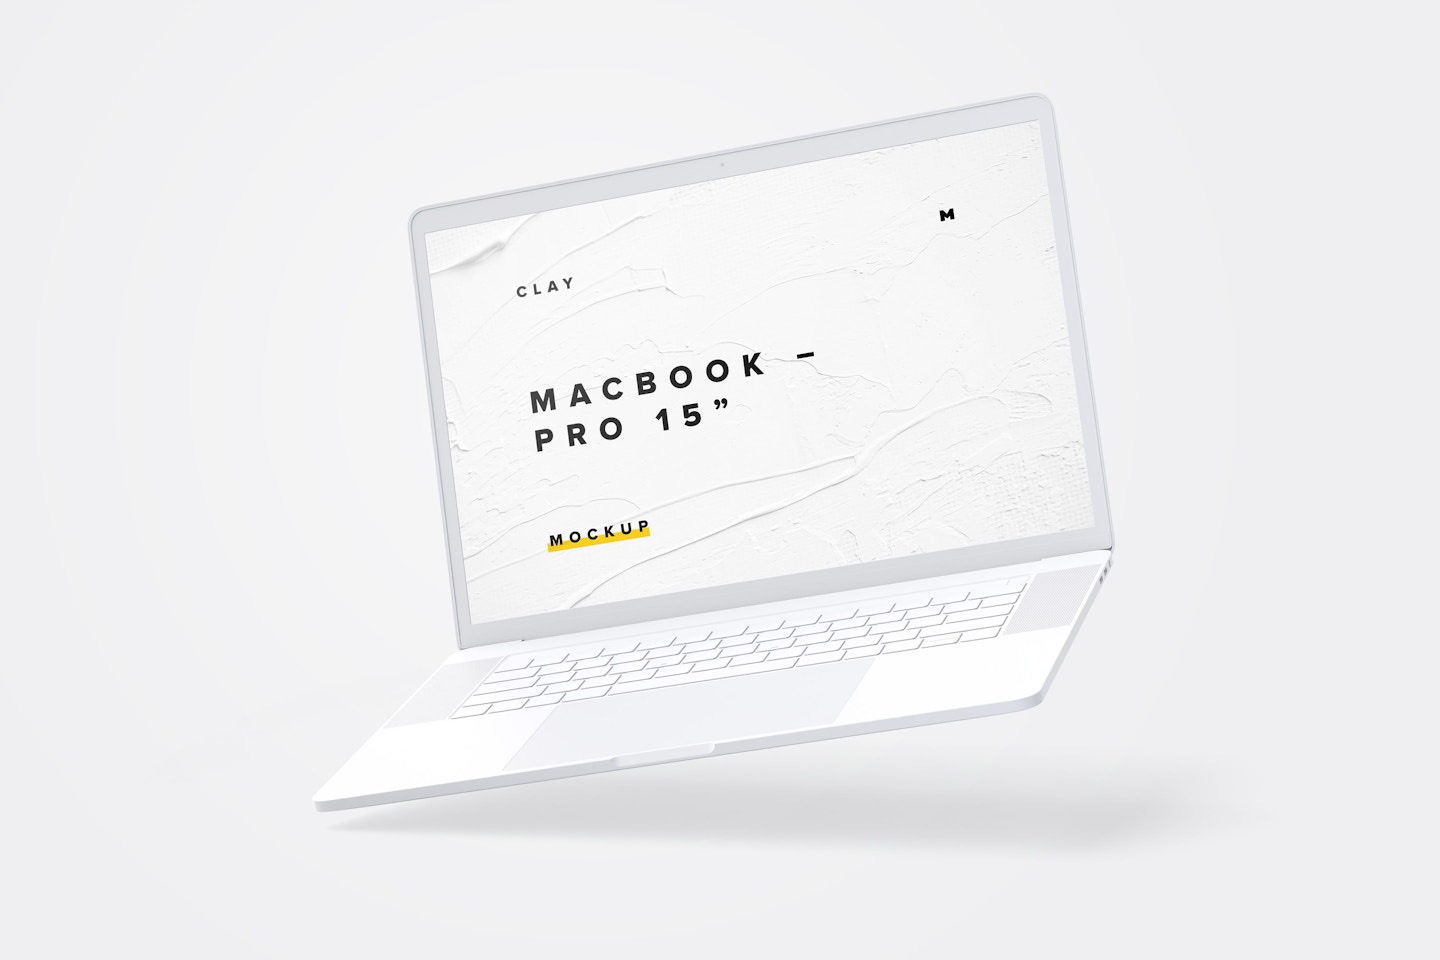 Clay MacBook Pro 15" with Touch Bar Mockup